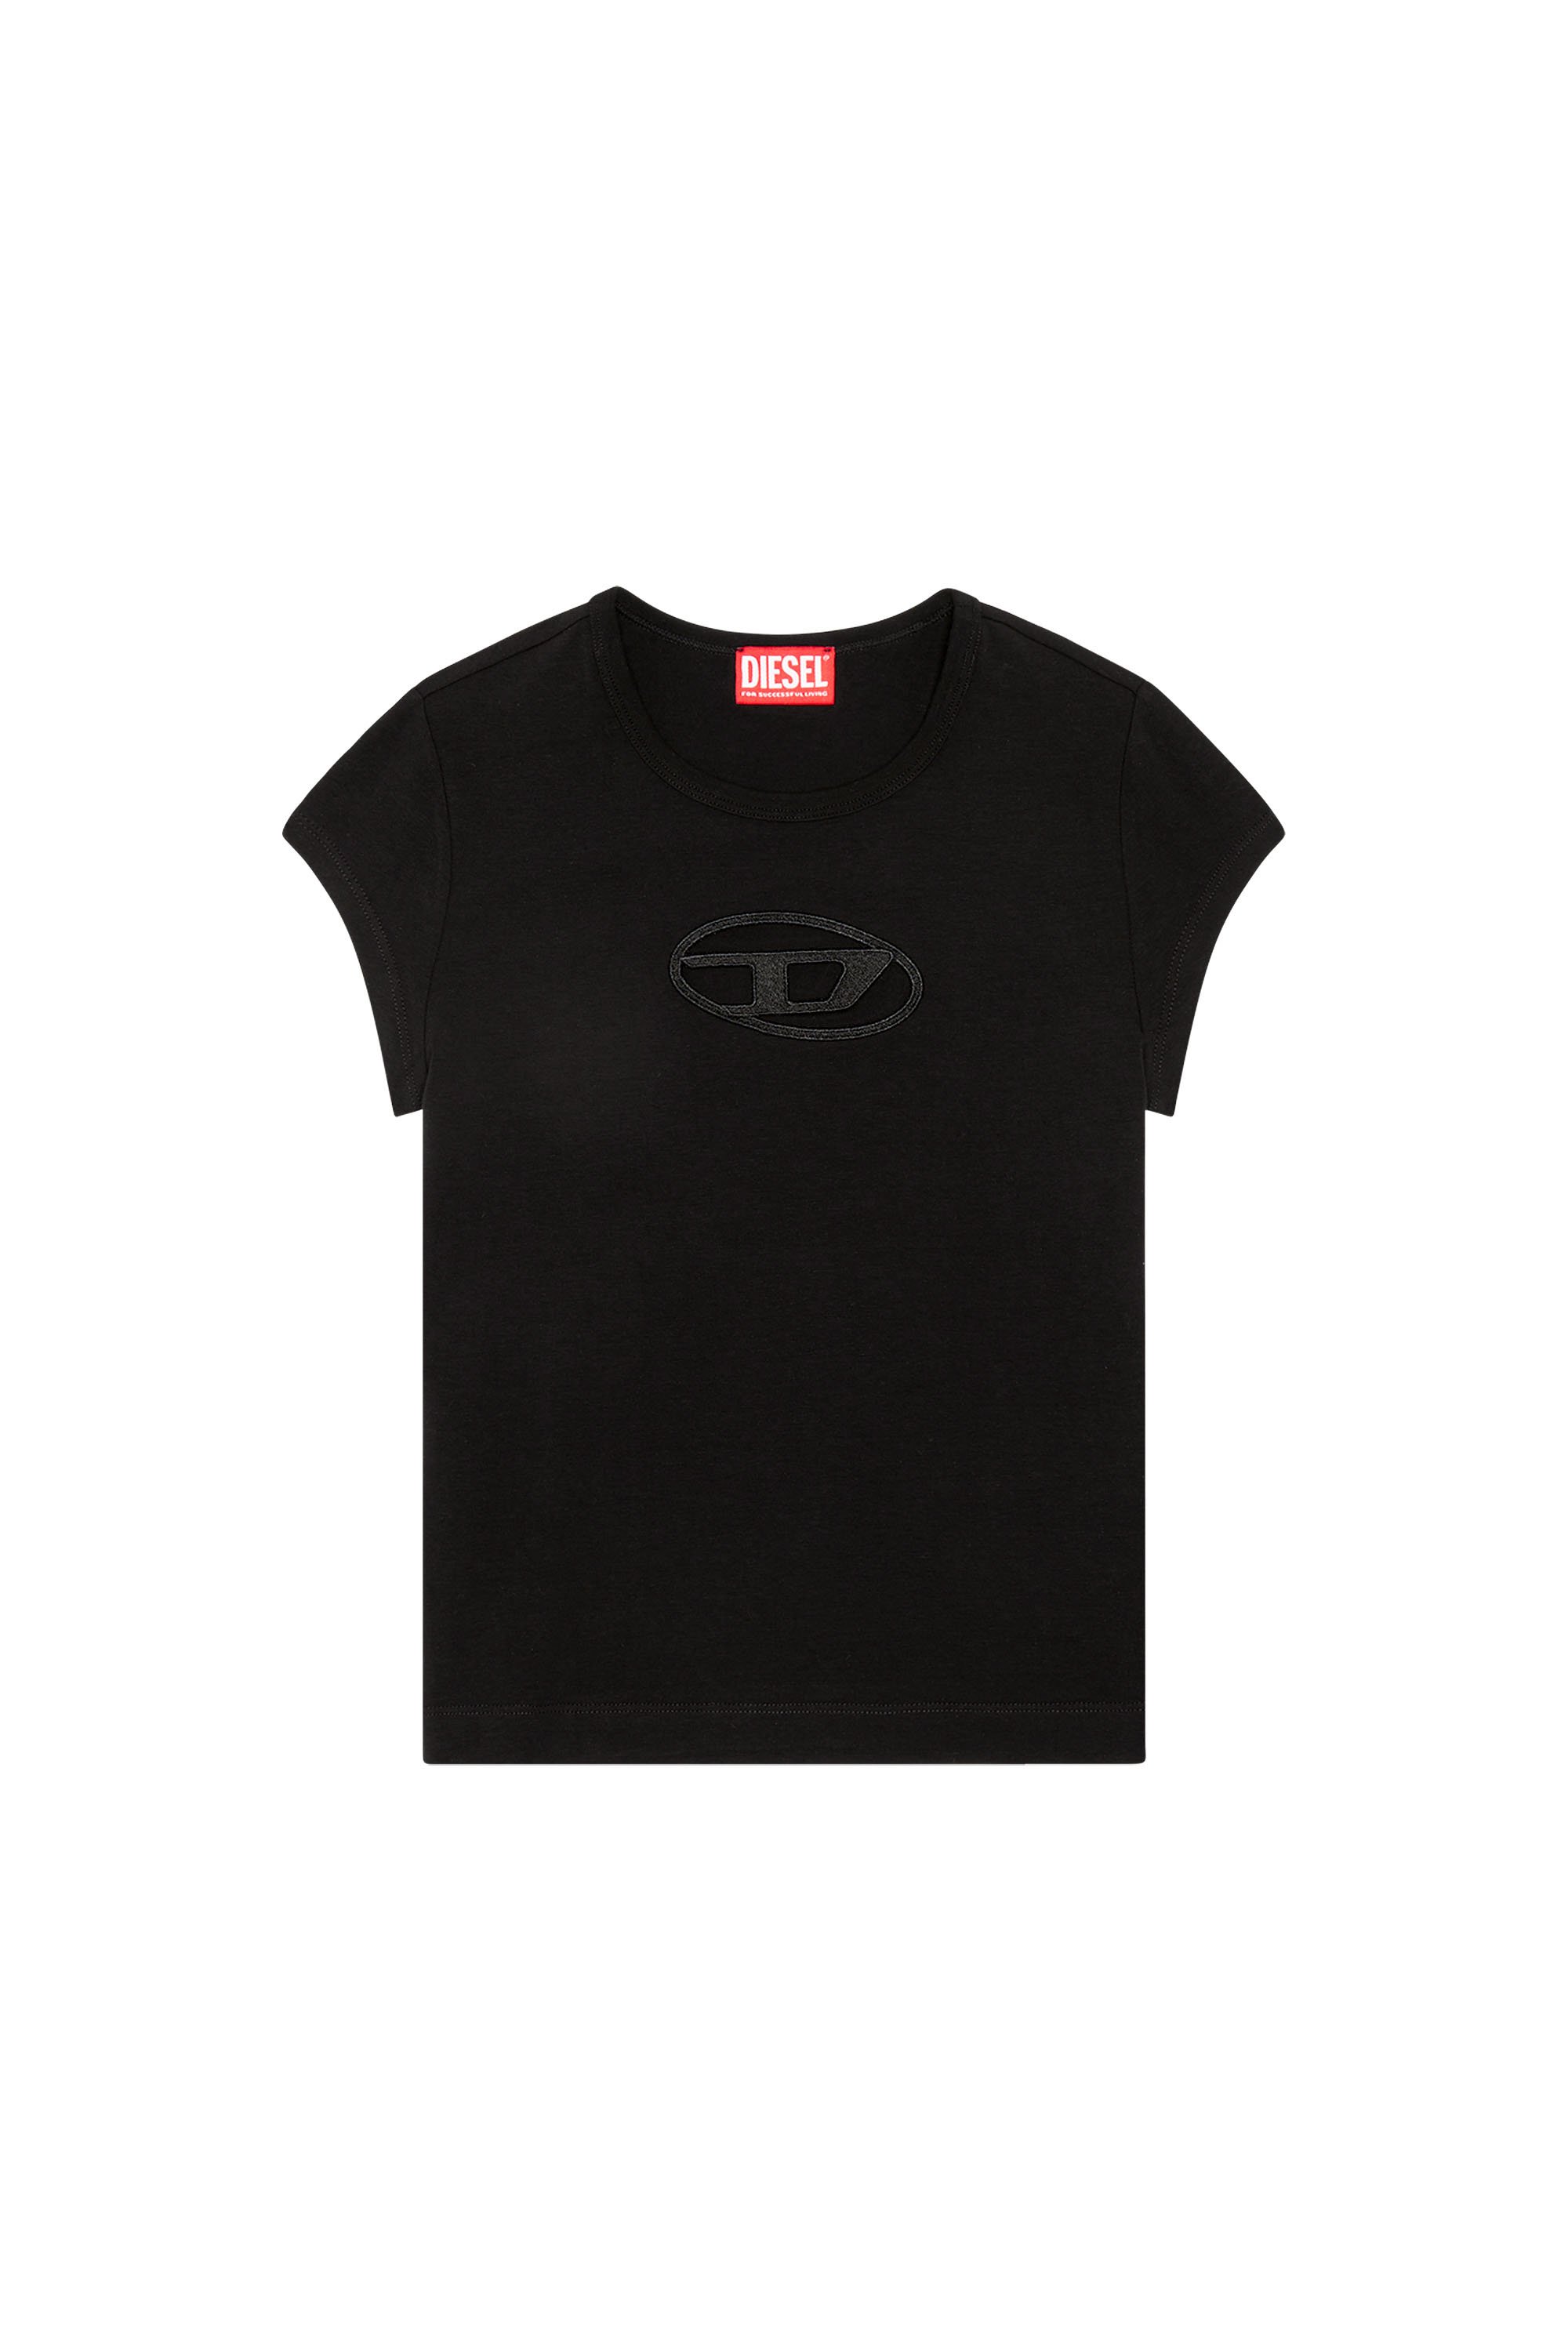 Women's T shirts and Tops: Graphic, Logo   Diese ...